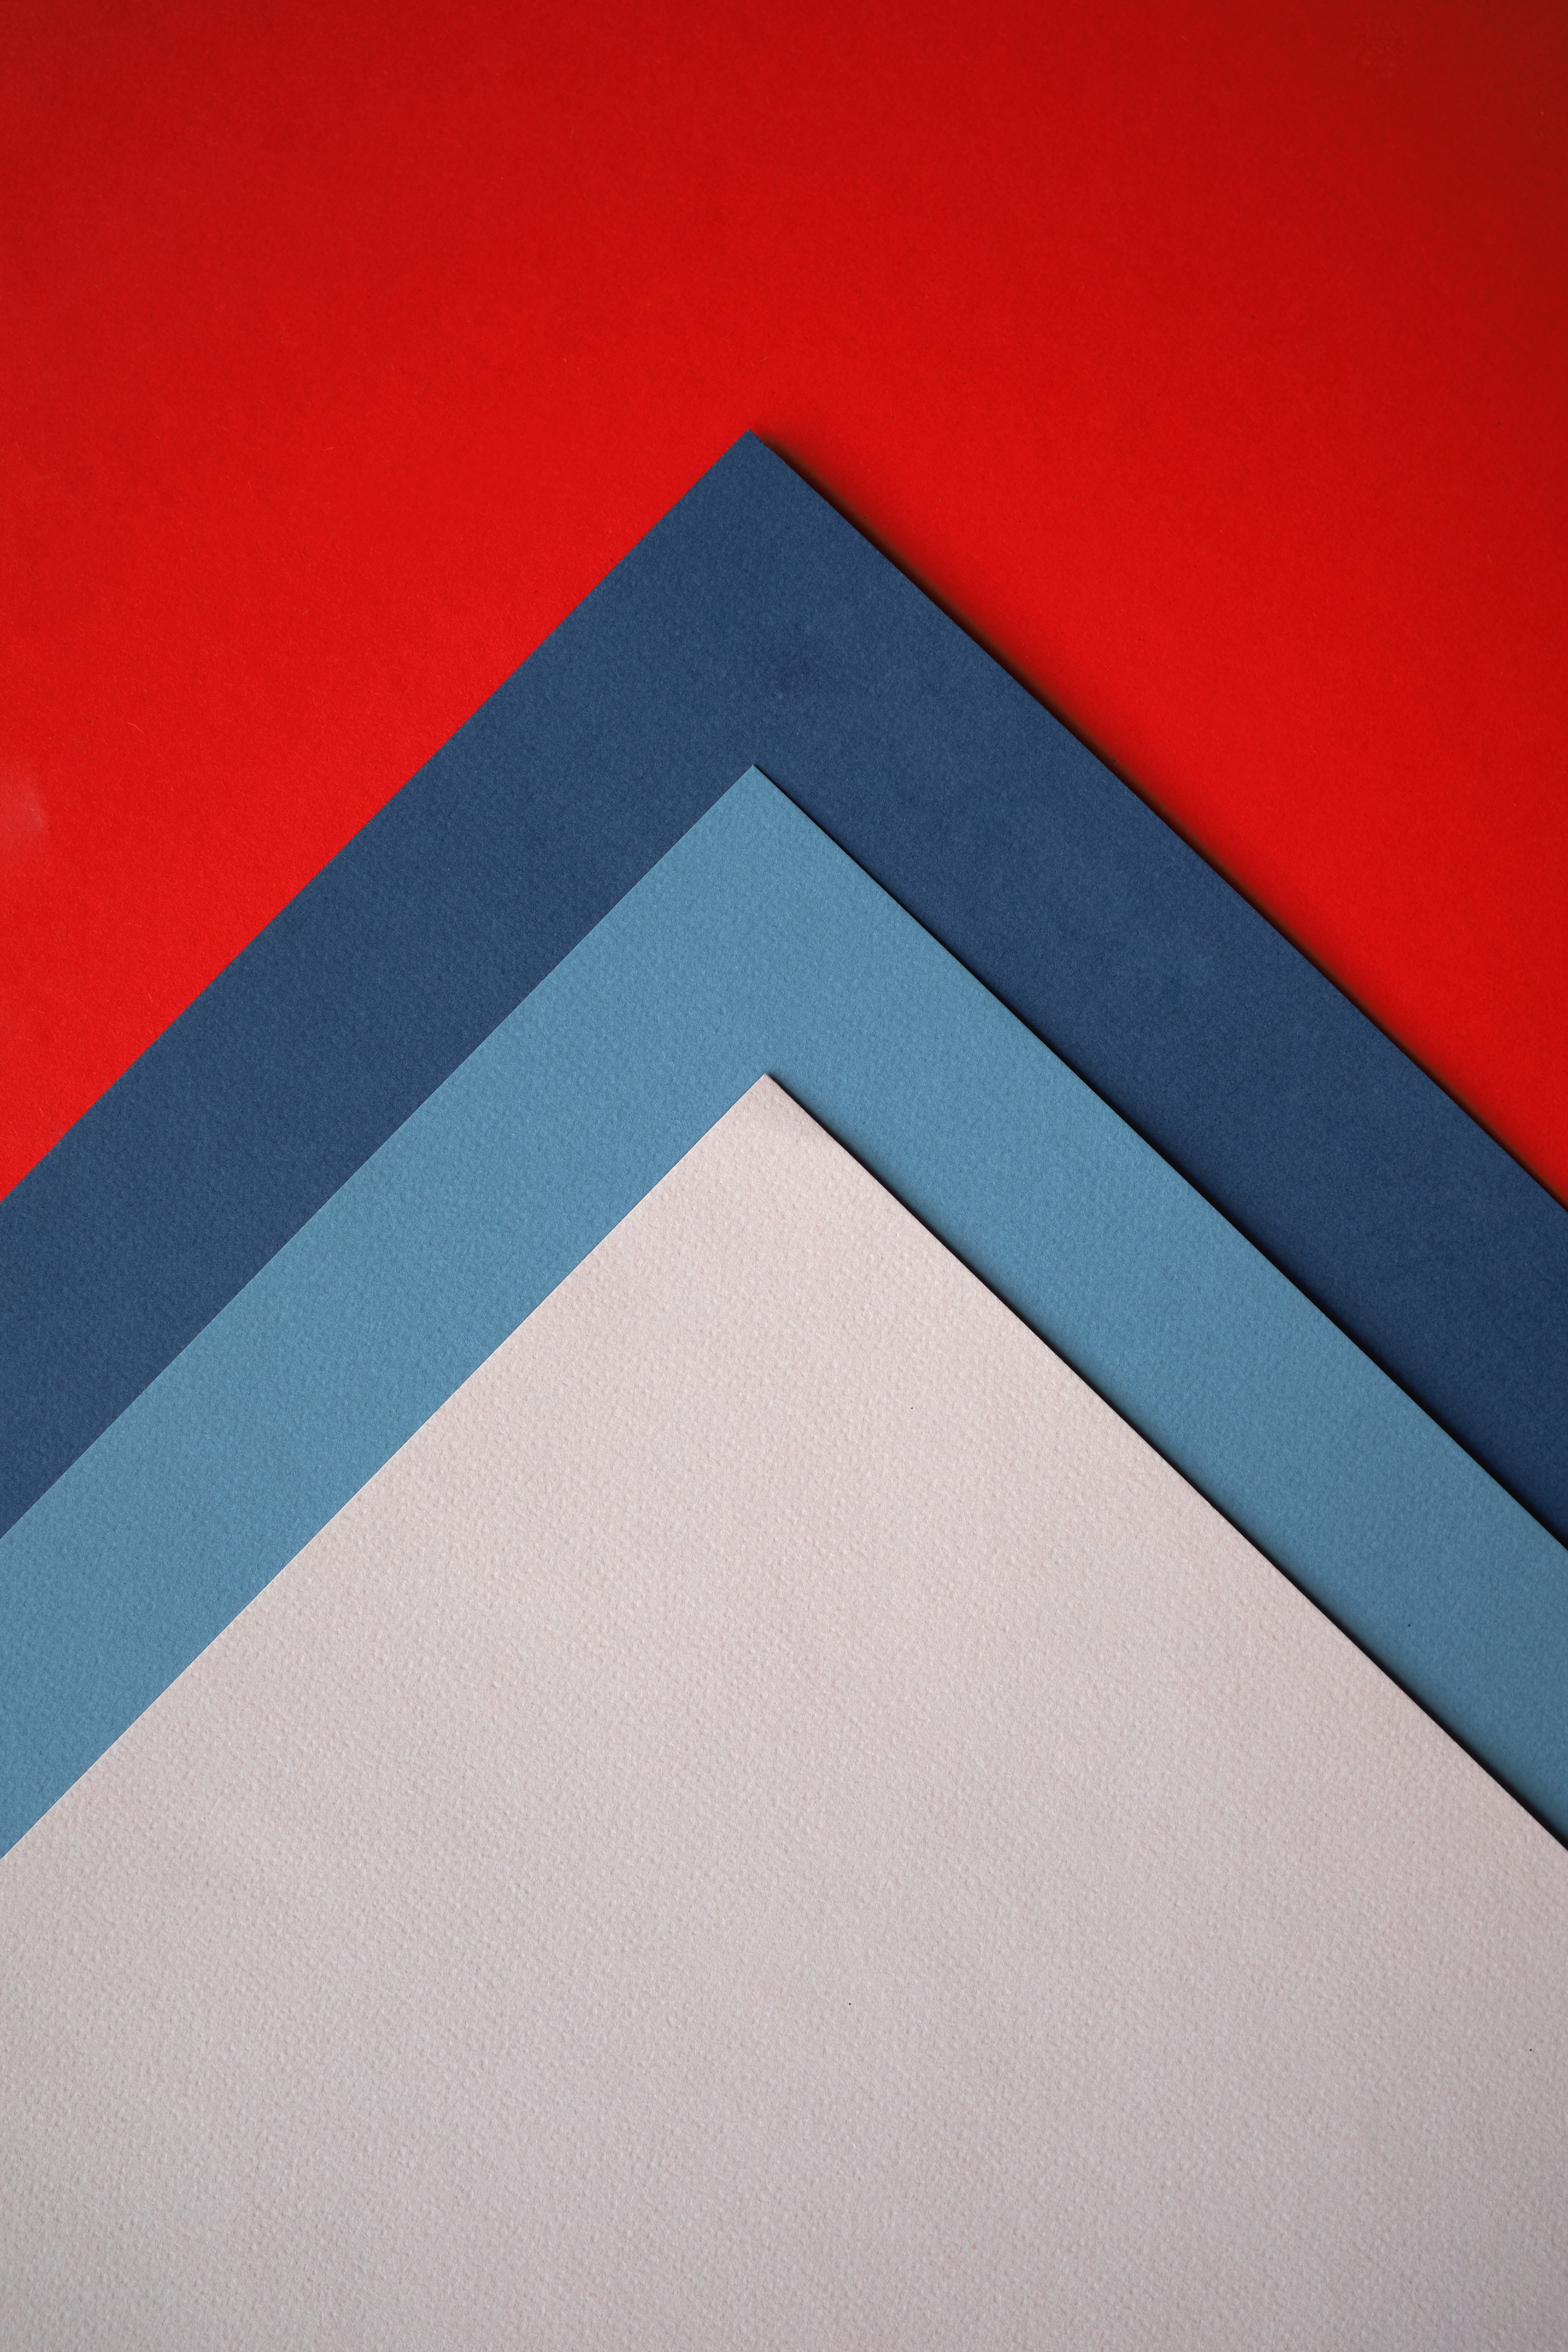 multicolored, textures, triangles, texture, paper, motley, sheets, overlay, imposition